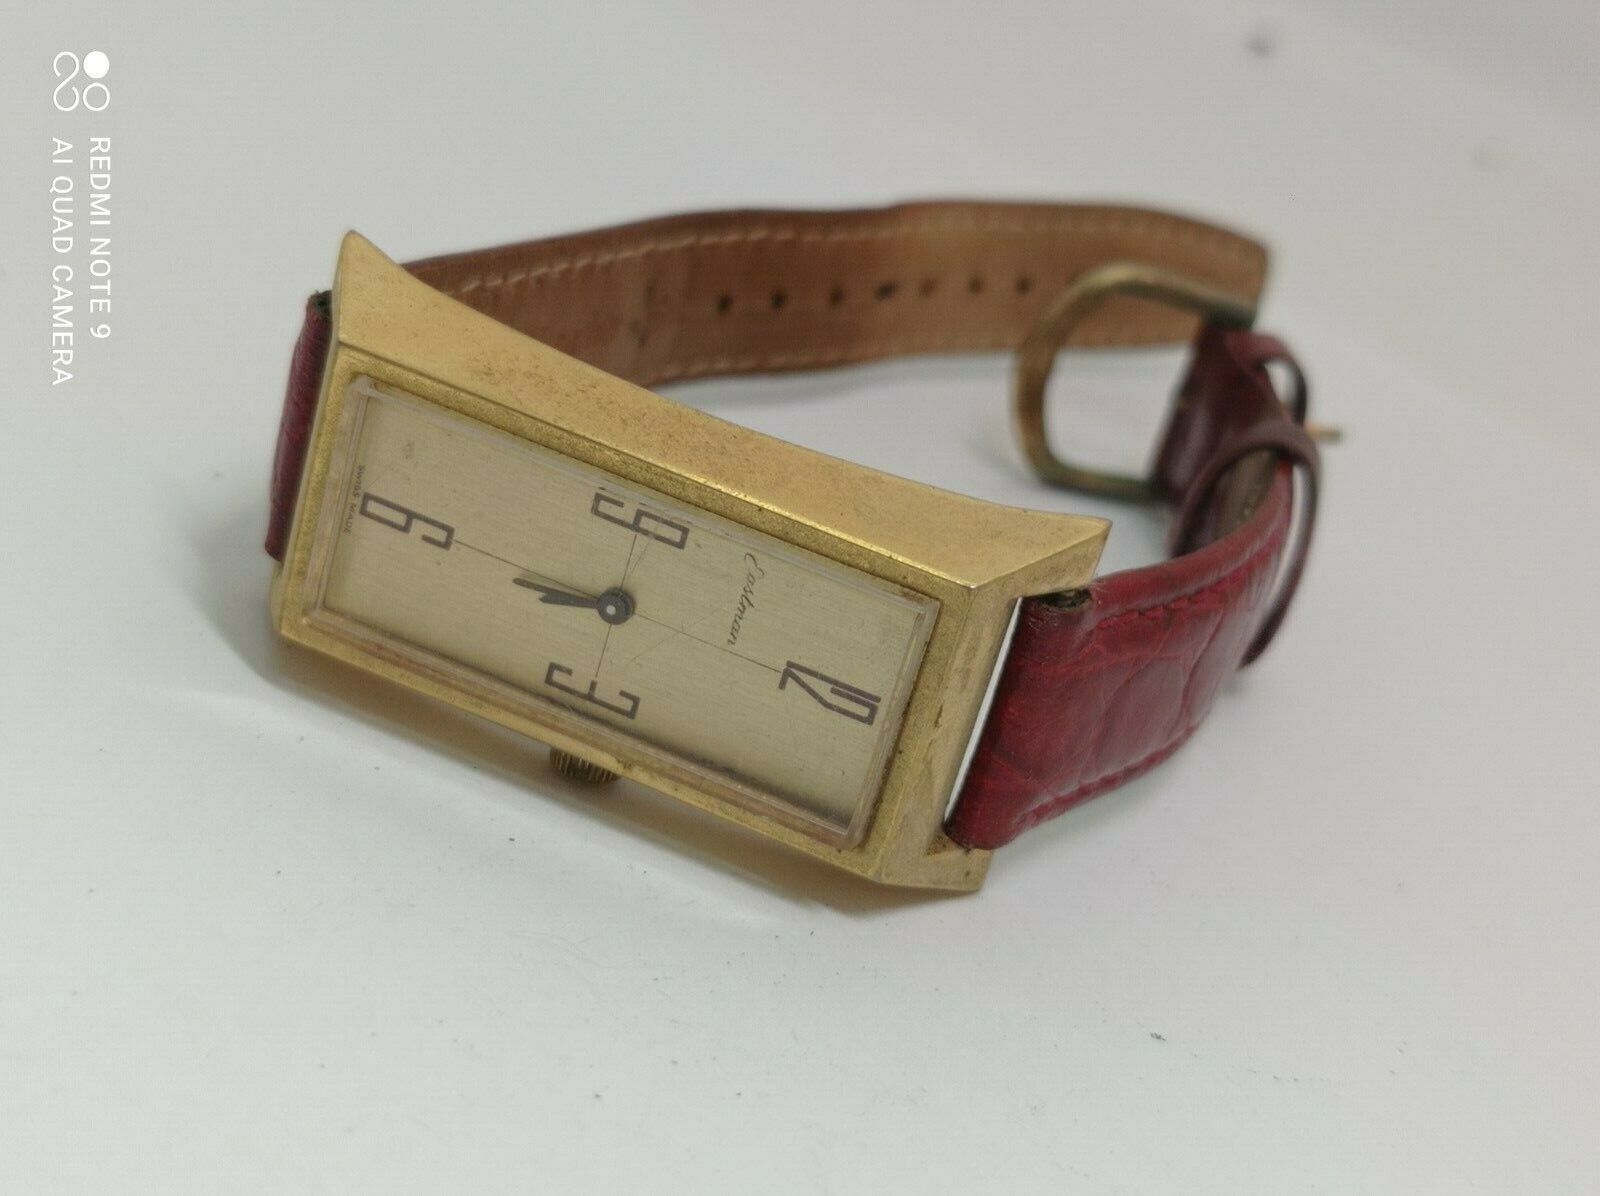 EASTMAN LADIES SWISS MADE MECHANICAL STYLISH WRISTWATCH AS-IS TO PARTS OR REPAIR